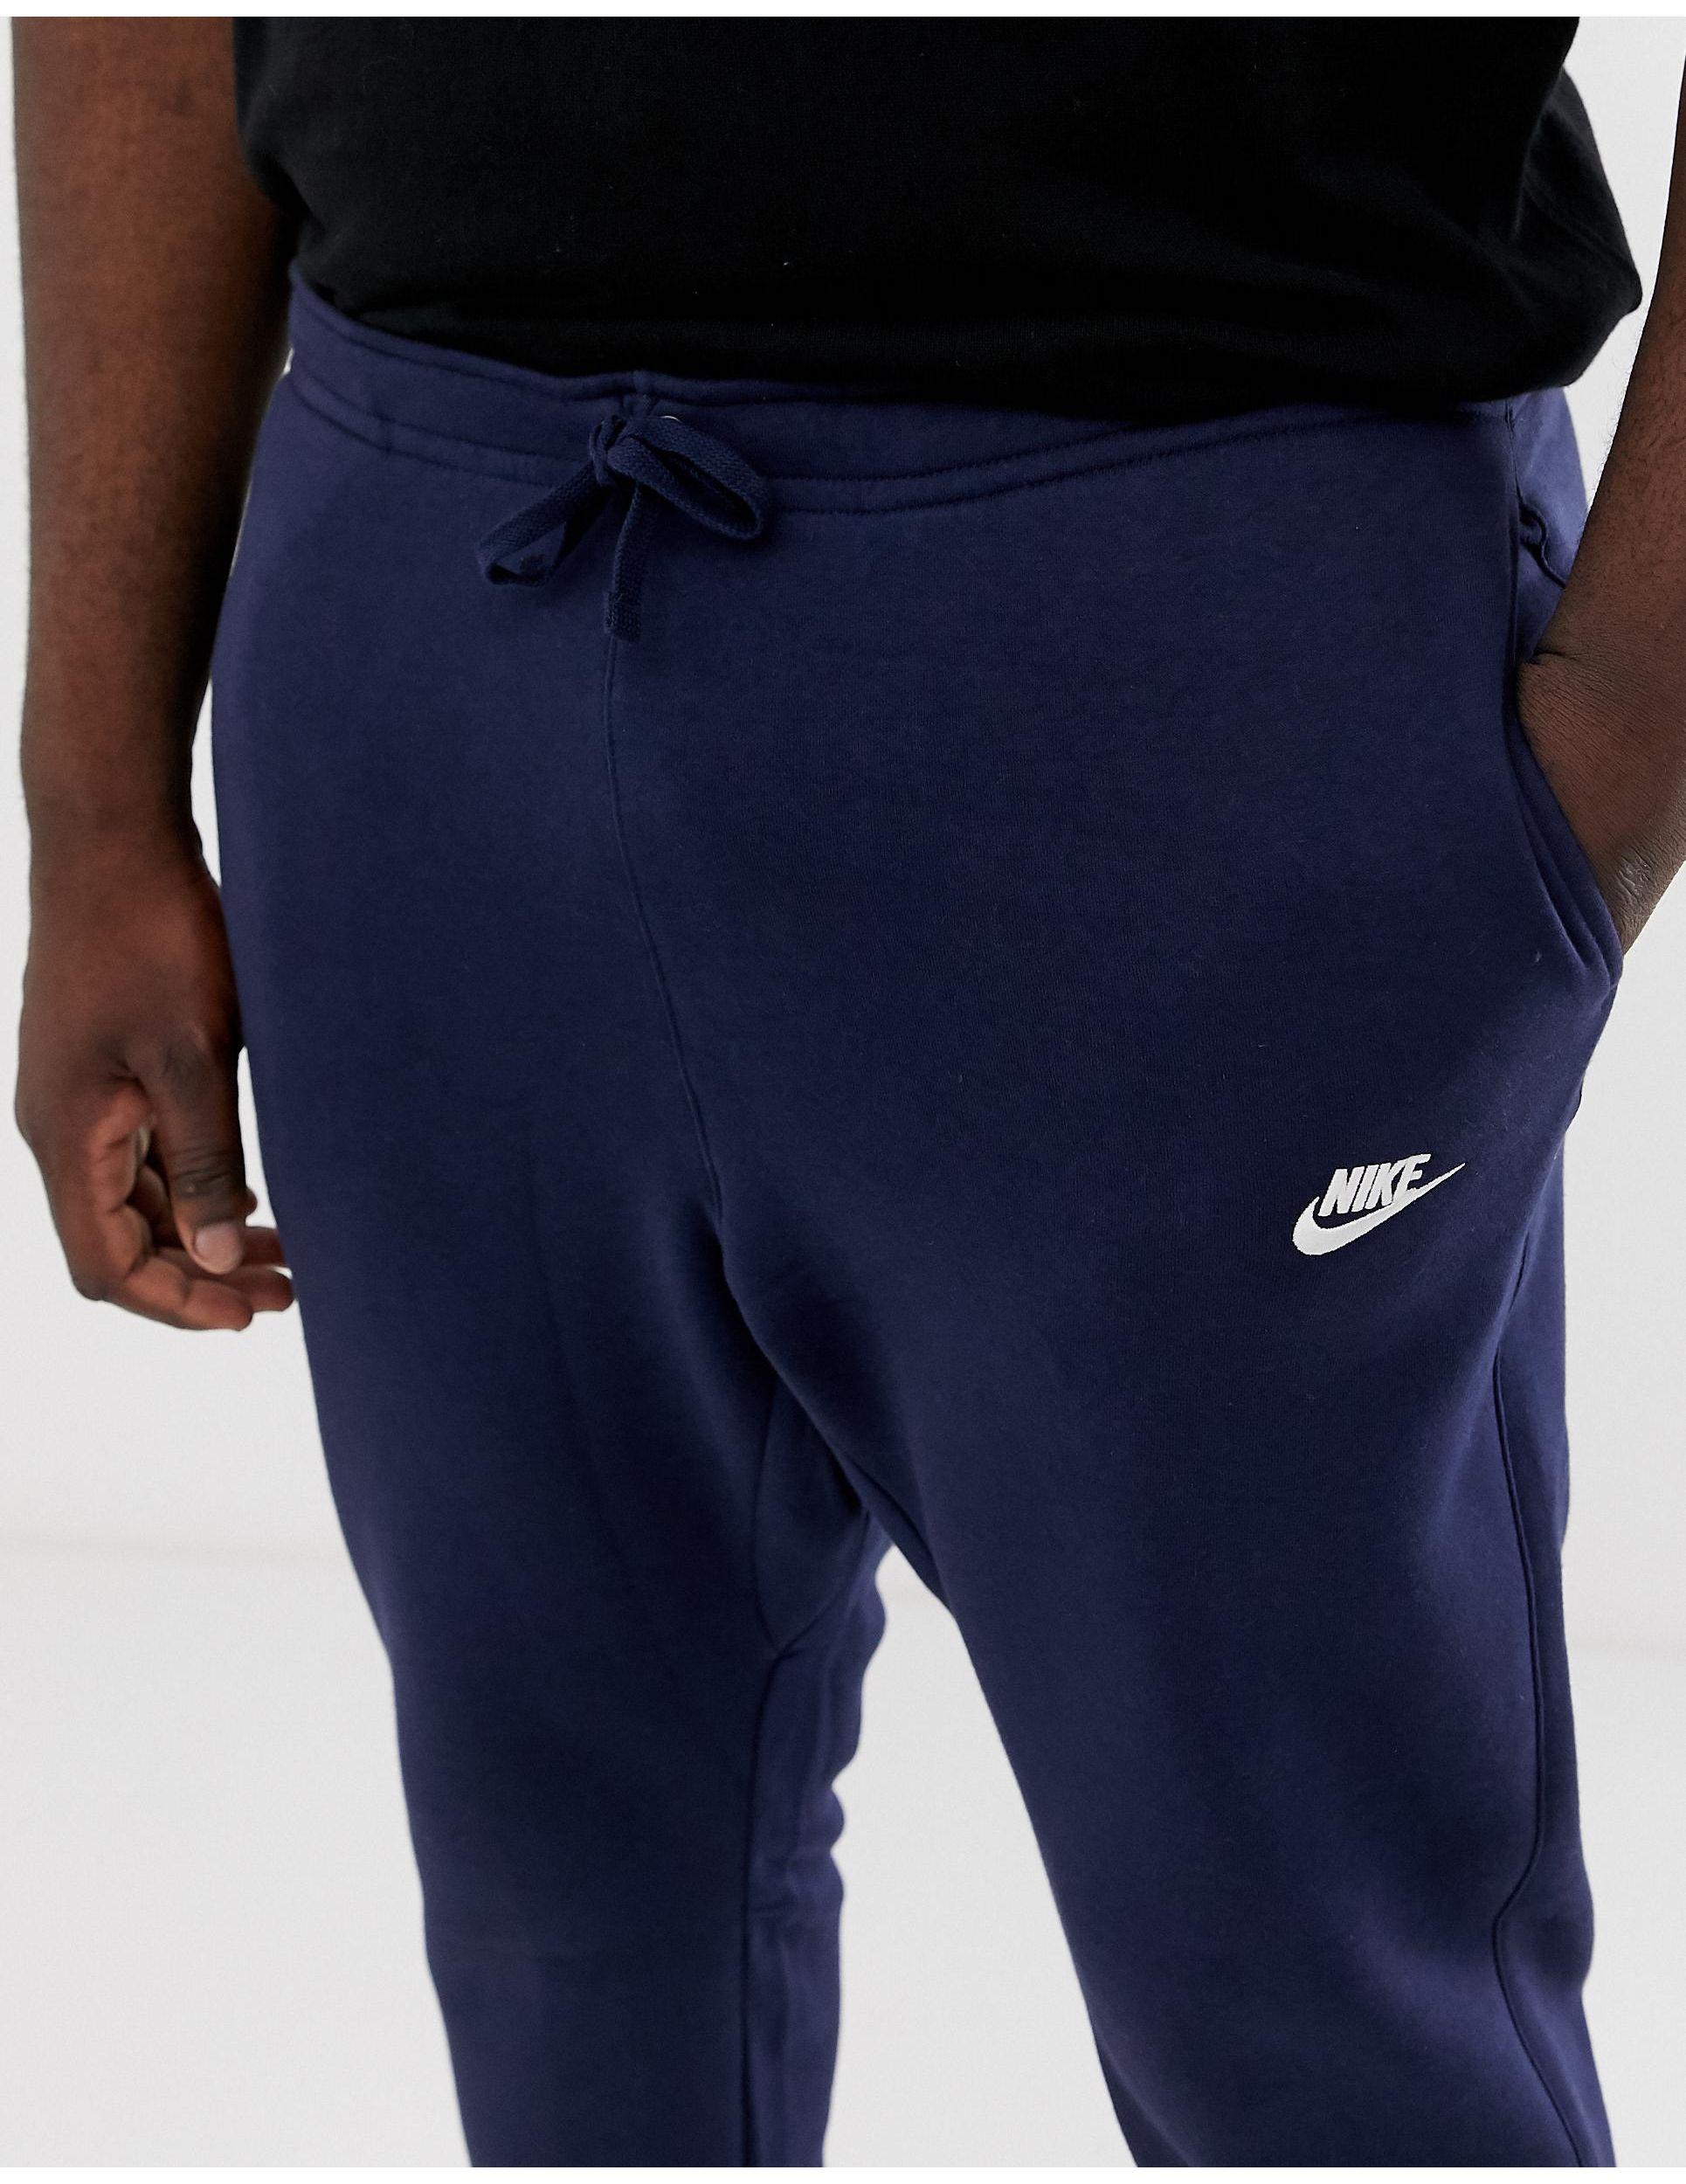 Nike Plus Club Cuffed joggers in Navy (Blue) for Men - Lyst